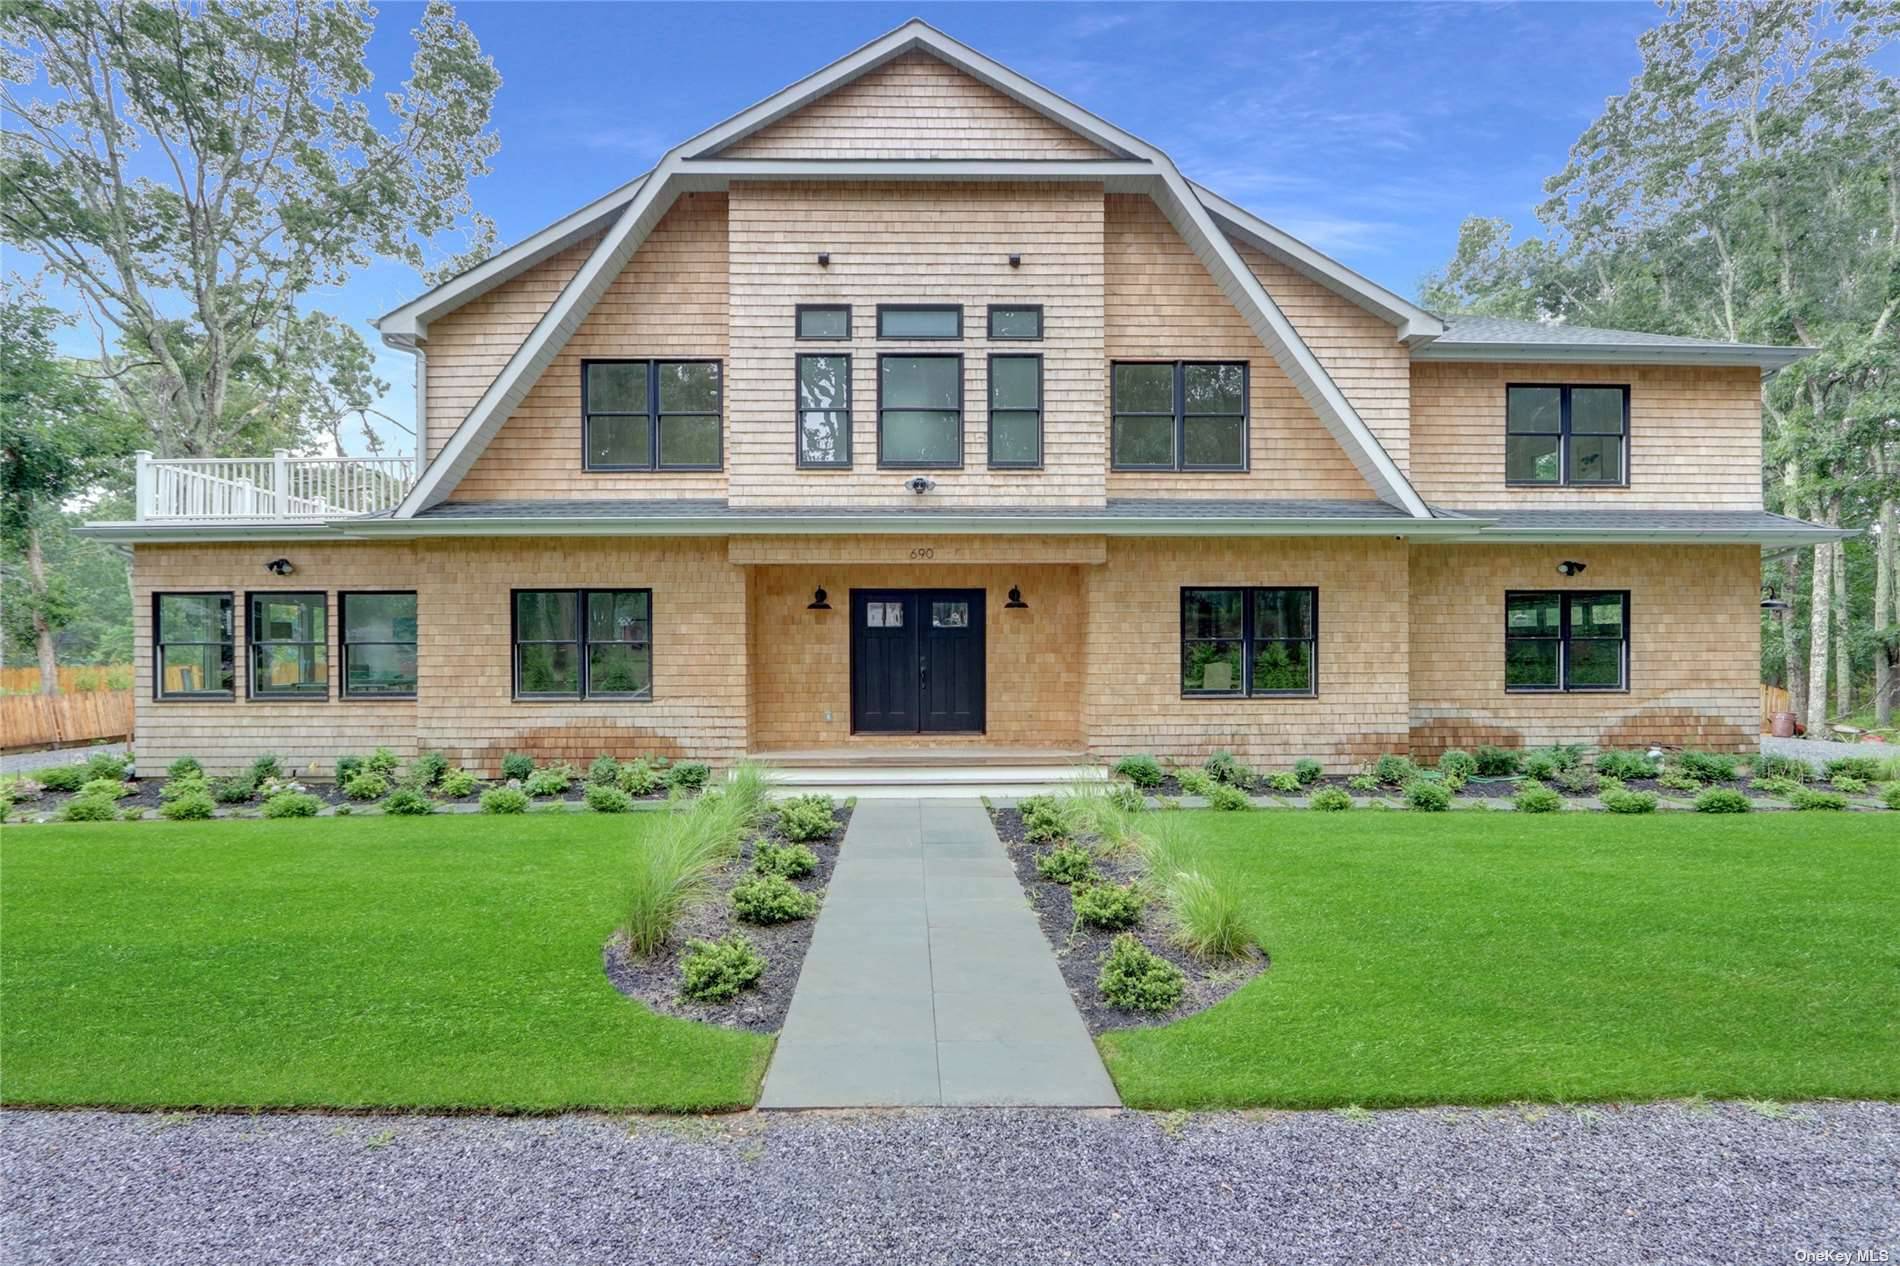 Located between Sag Harbor amp ; Bridgehampton is this impeccable new construction residence.